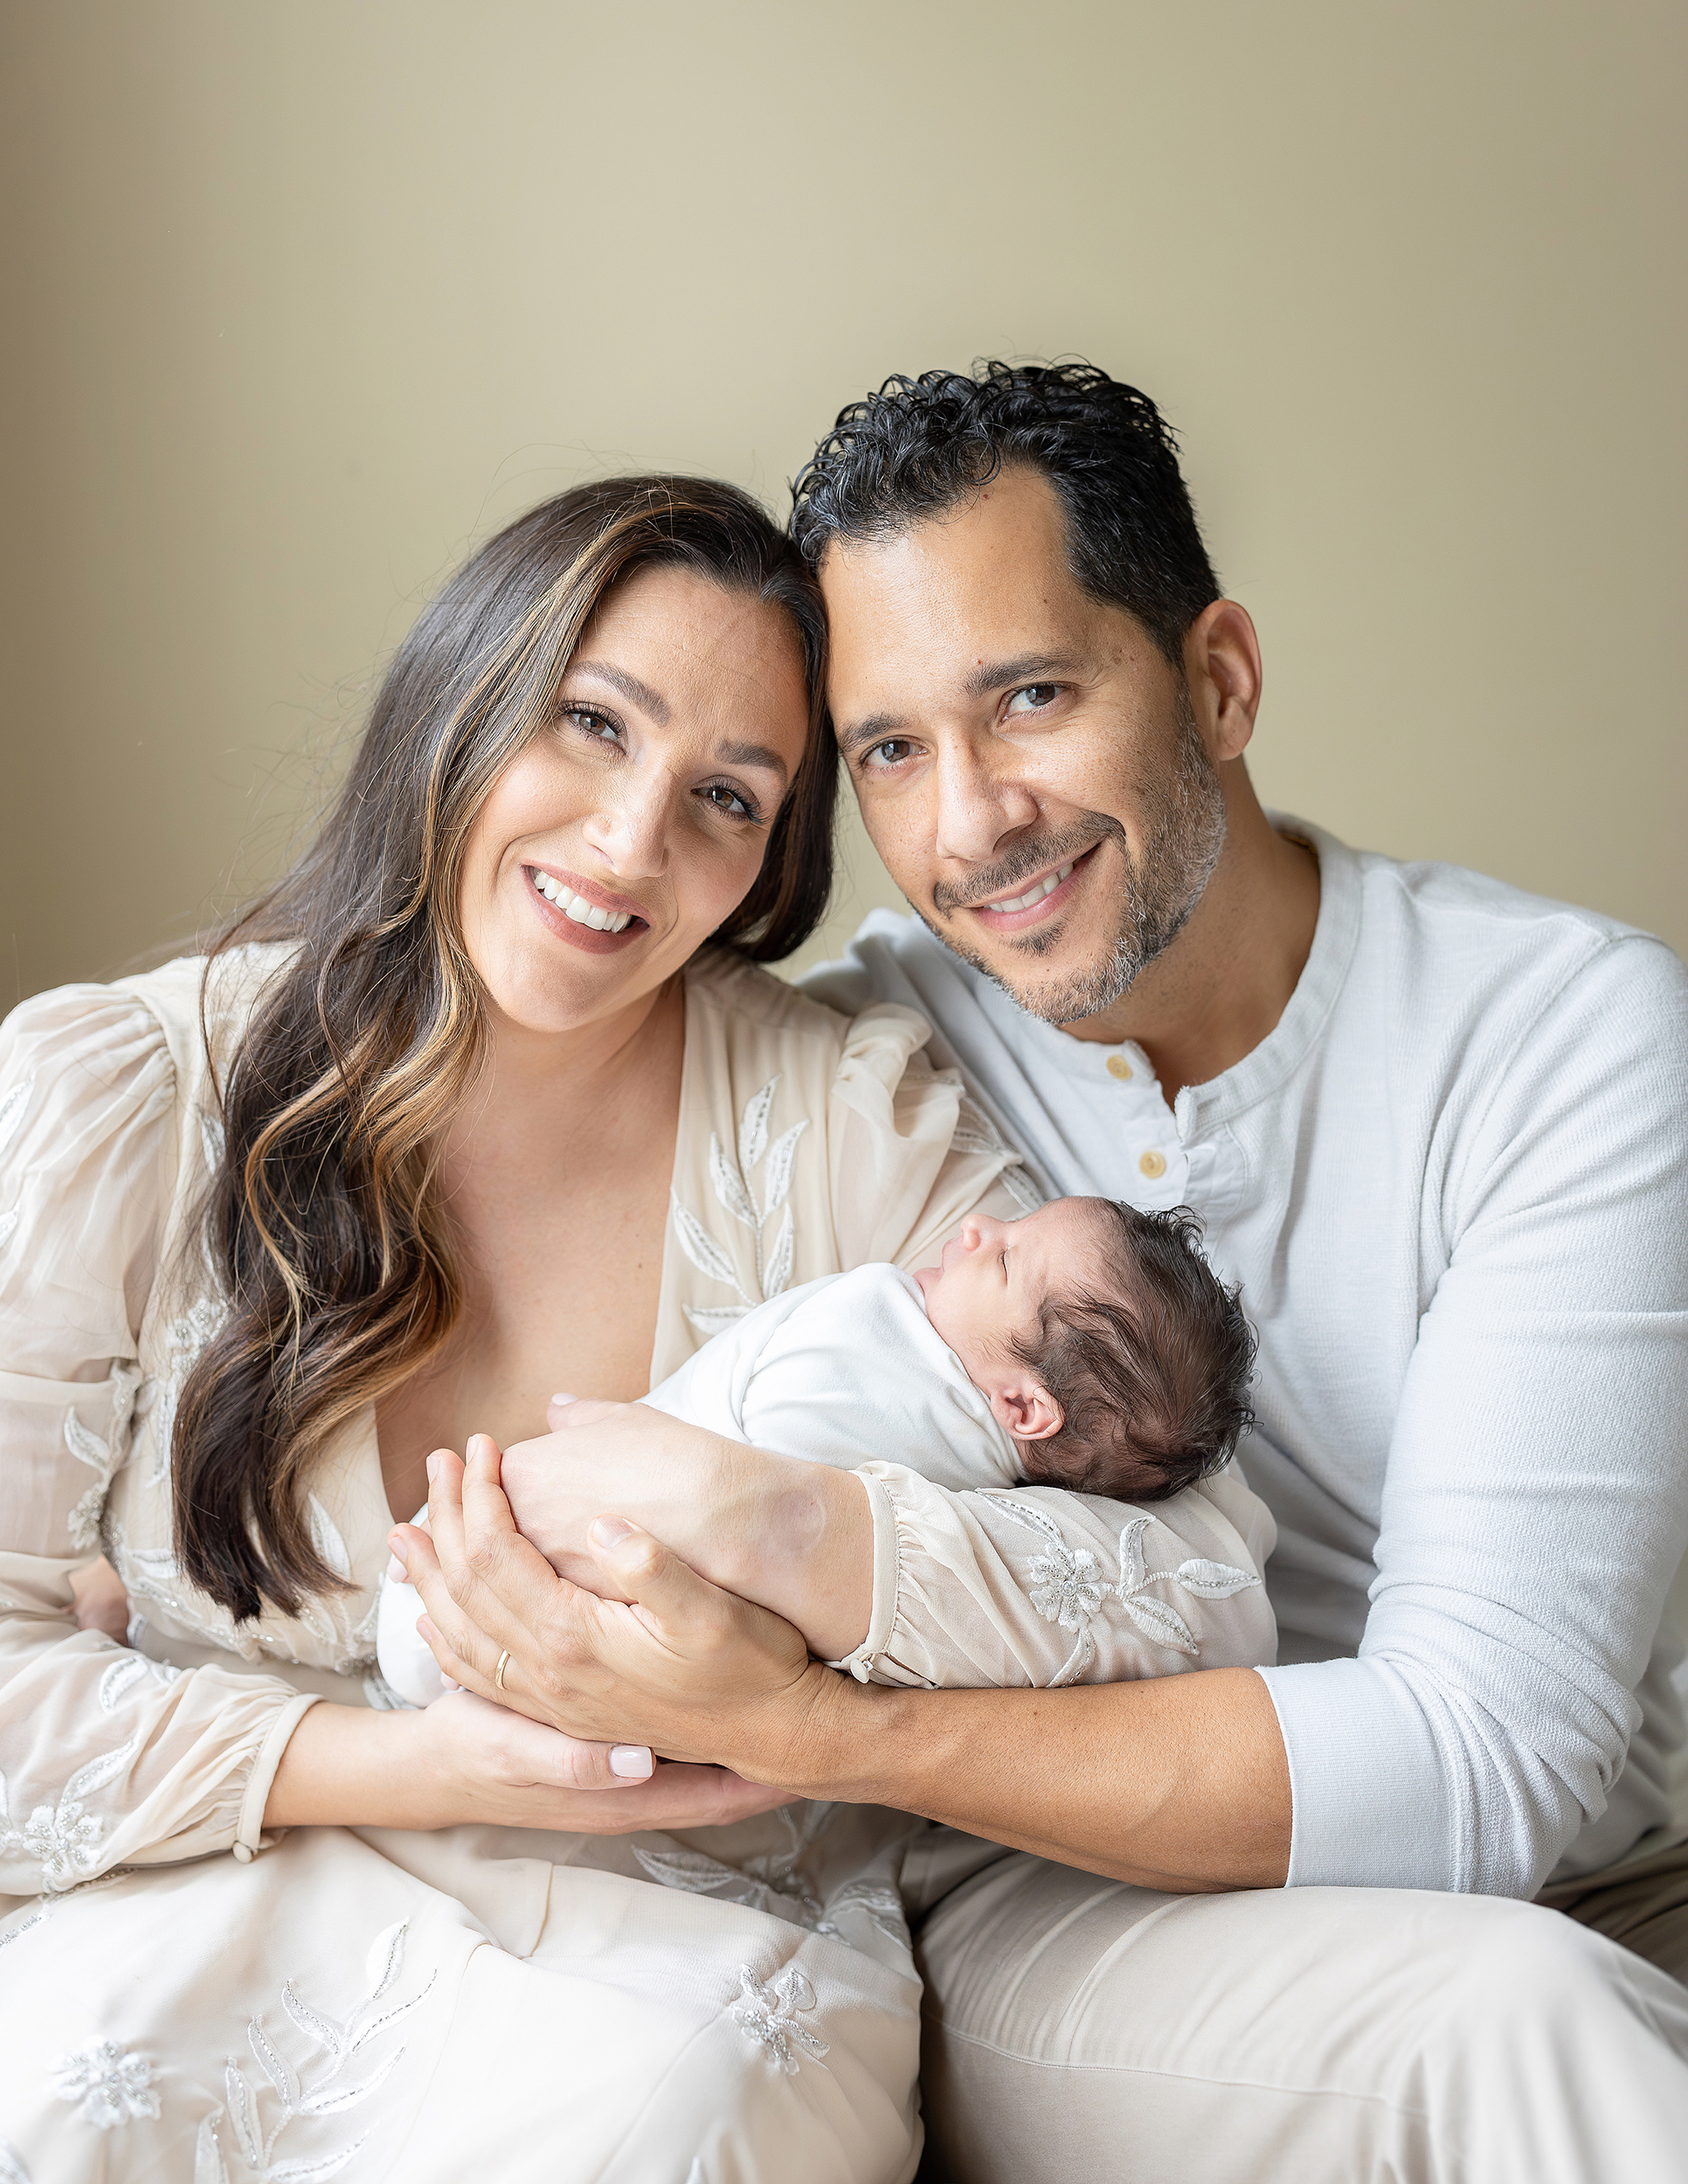 At home newborn portrait of man and woman with their newborn baby boy.